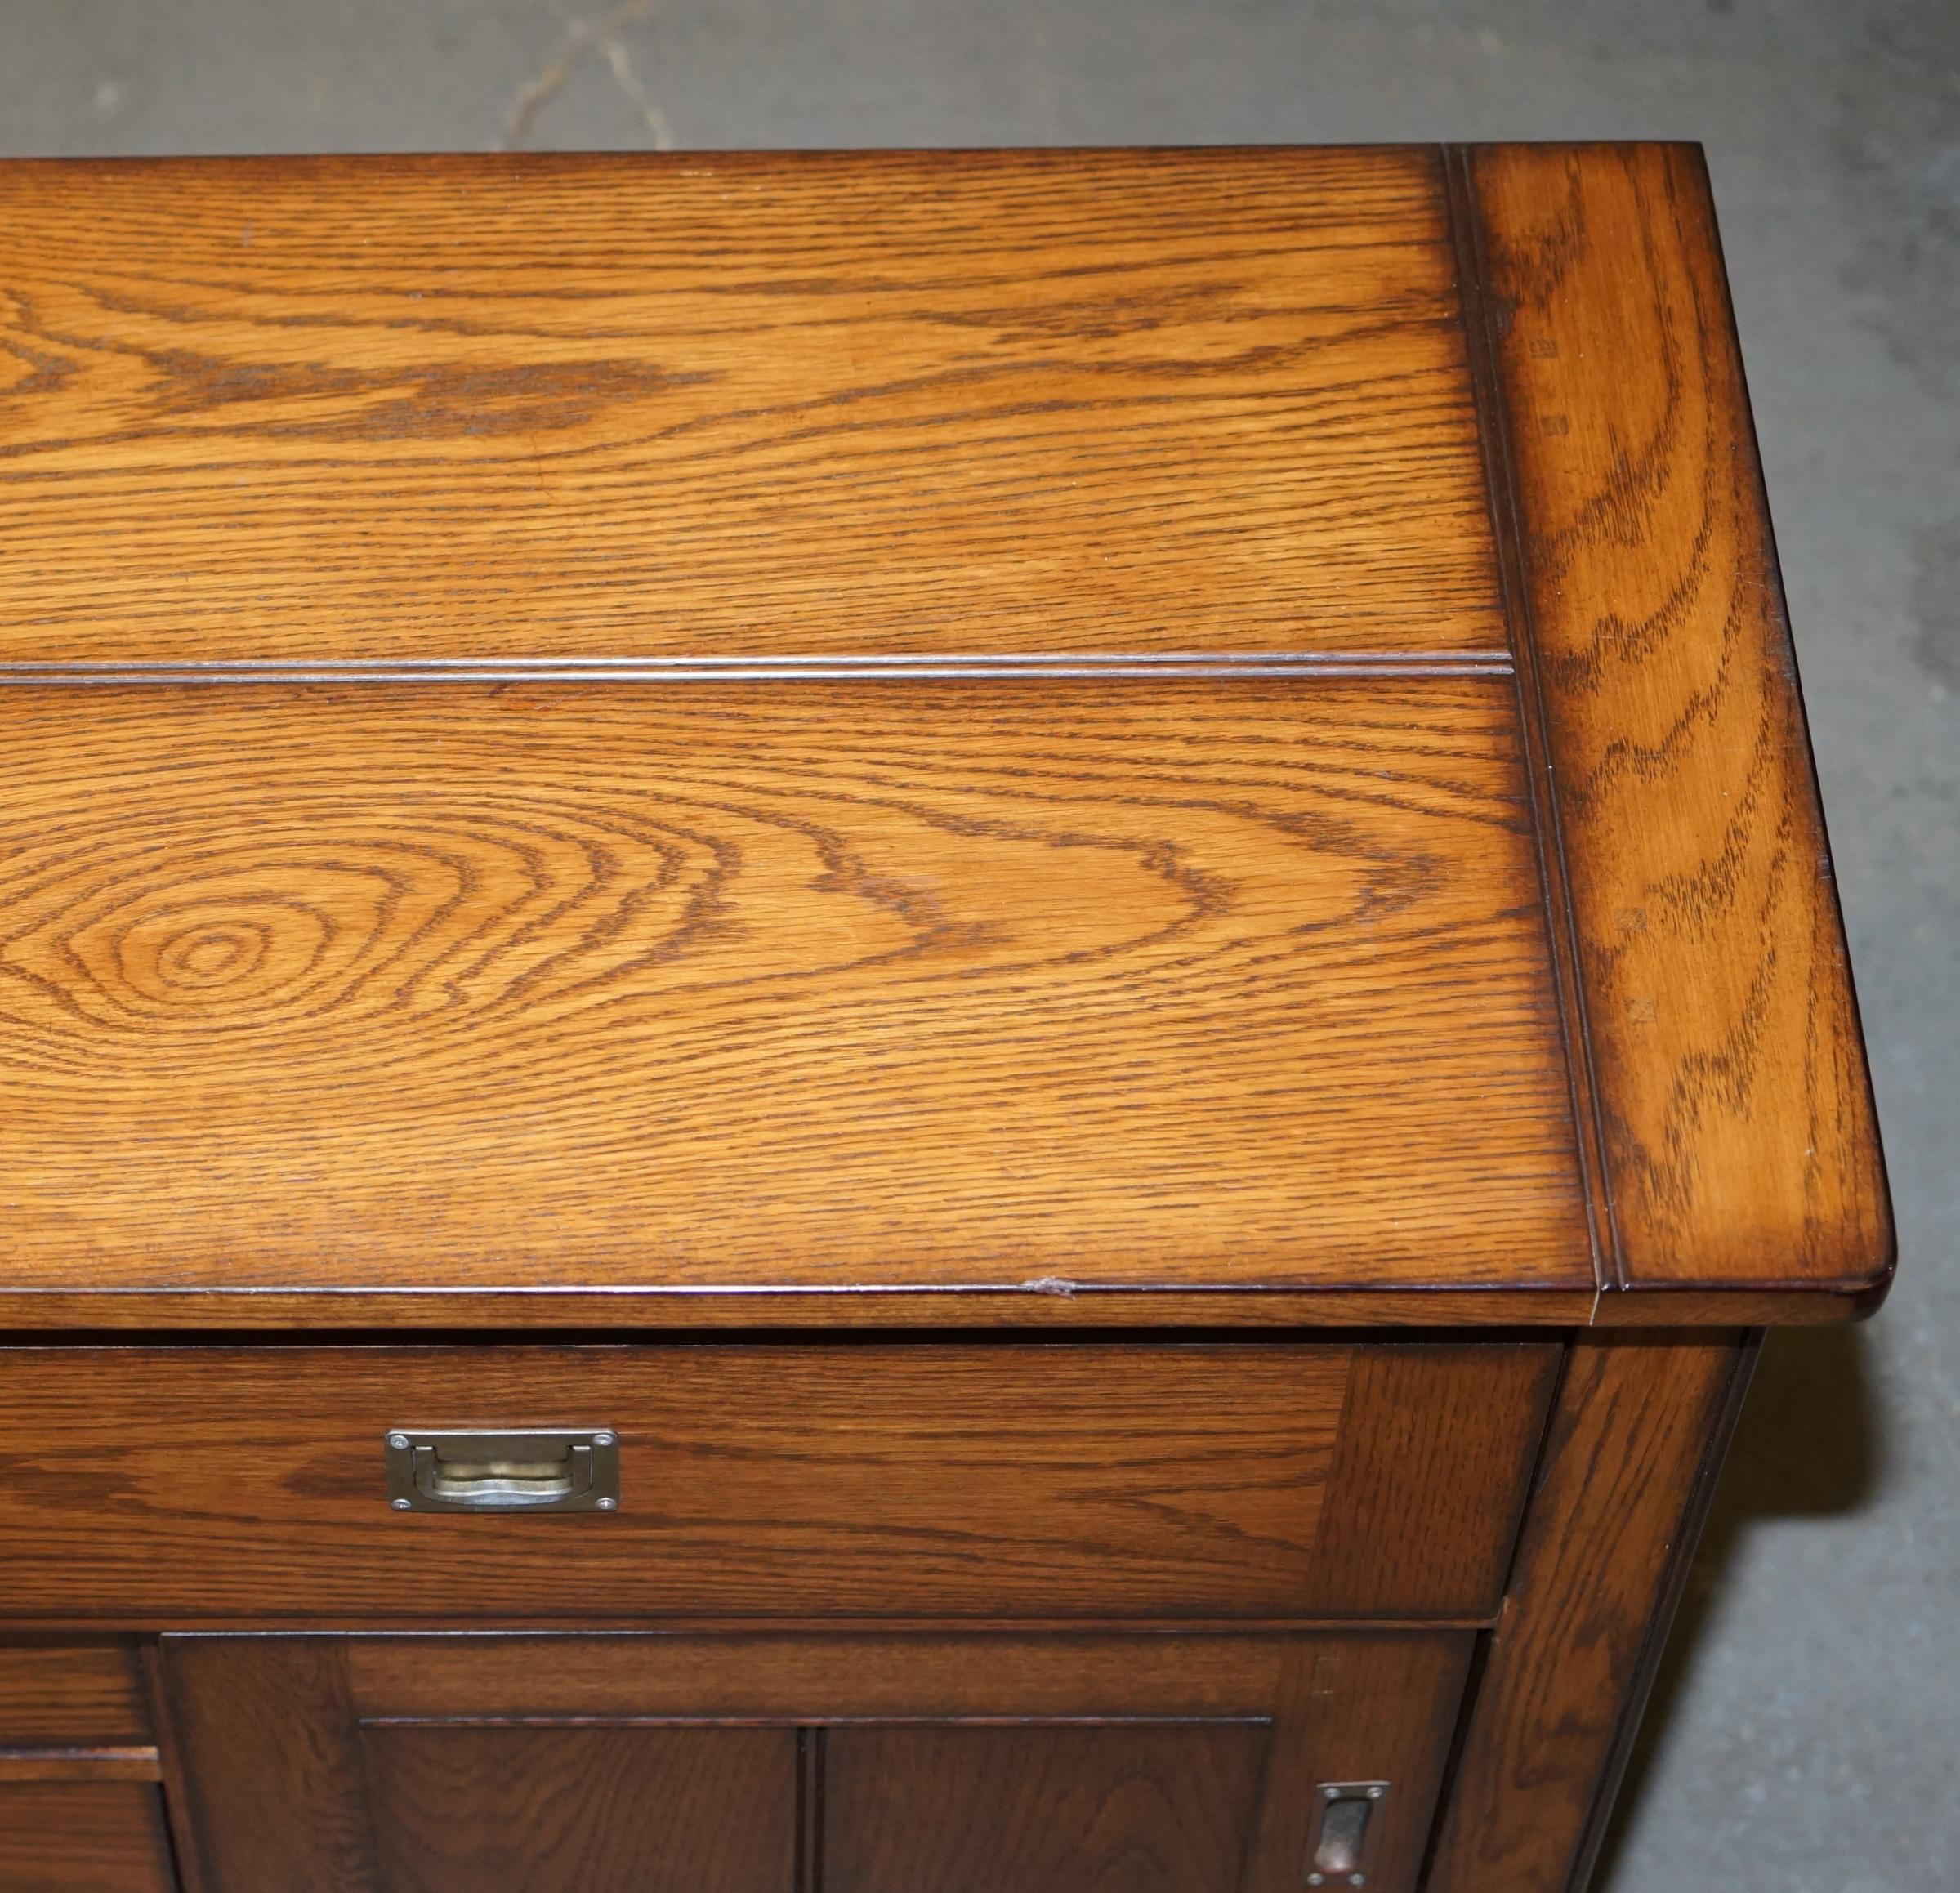 Stunning Solid Oak Vintage Campaign Style Sideboard with Drawers and Cupboards 1